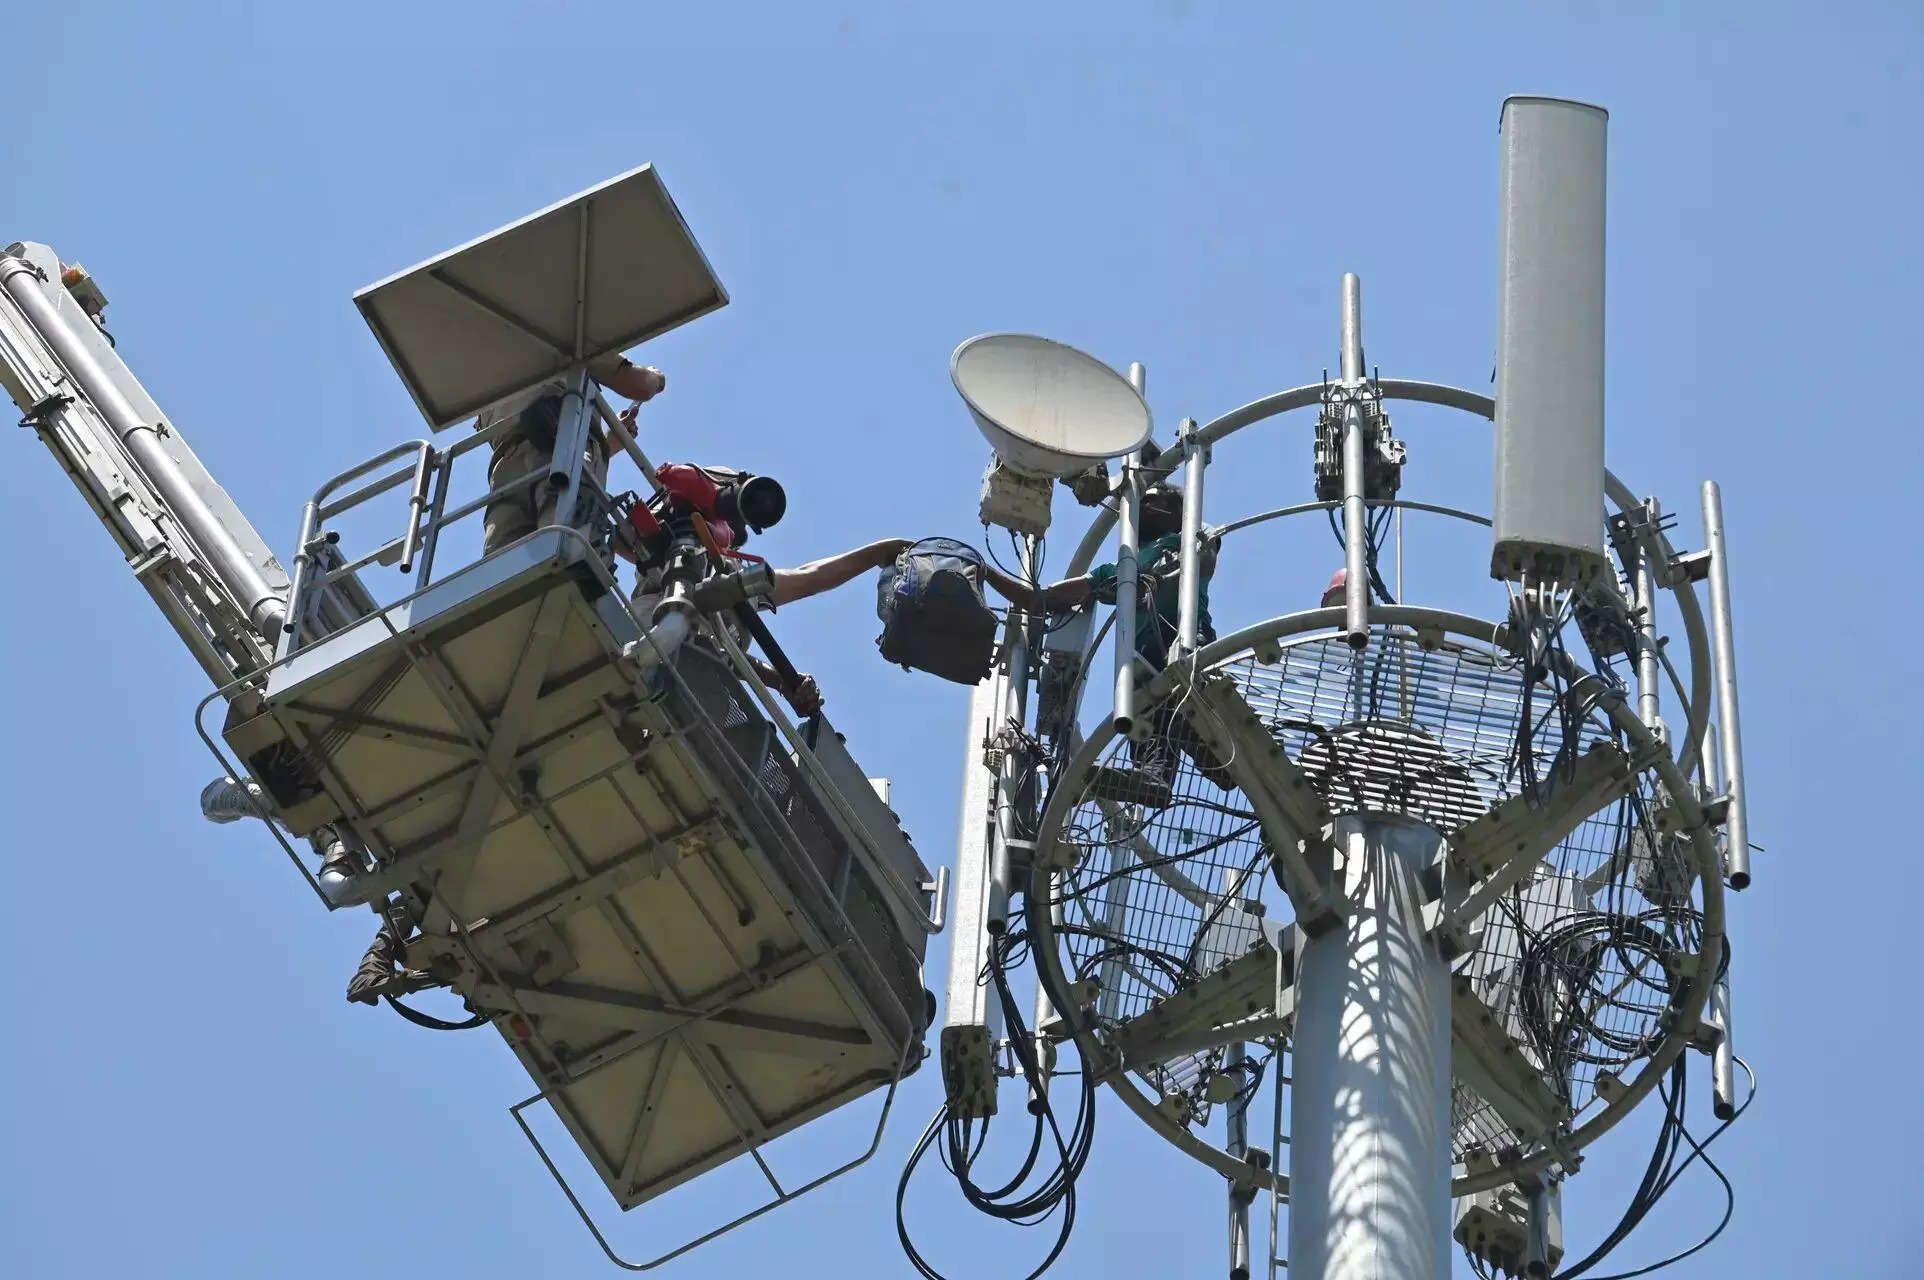 Spectrum auction ends in 2 days, fetches Rs 11,000 crore